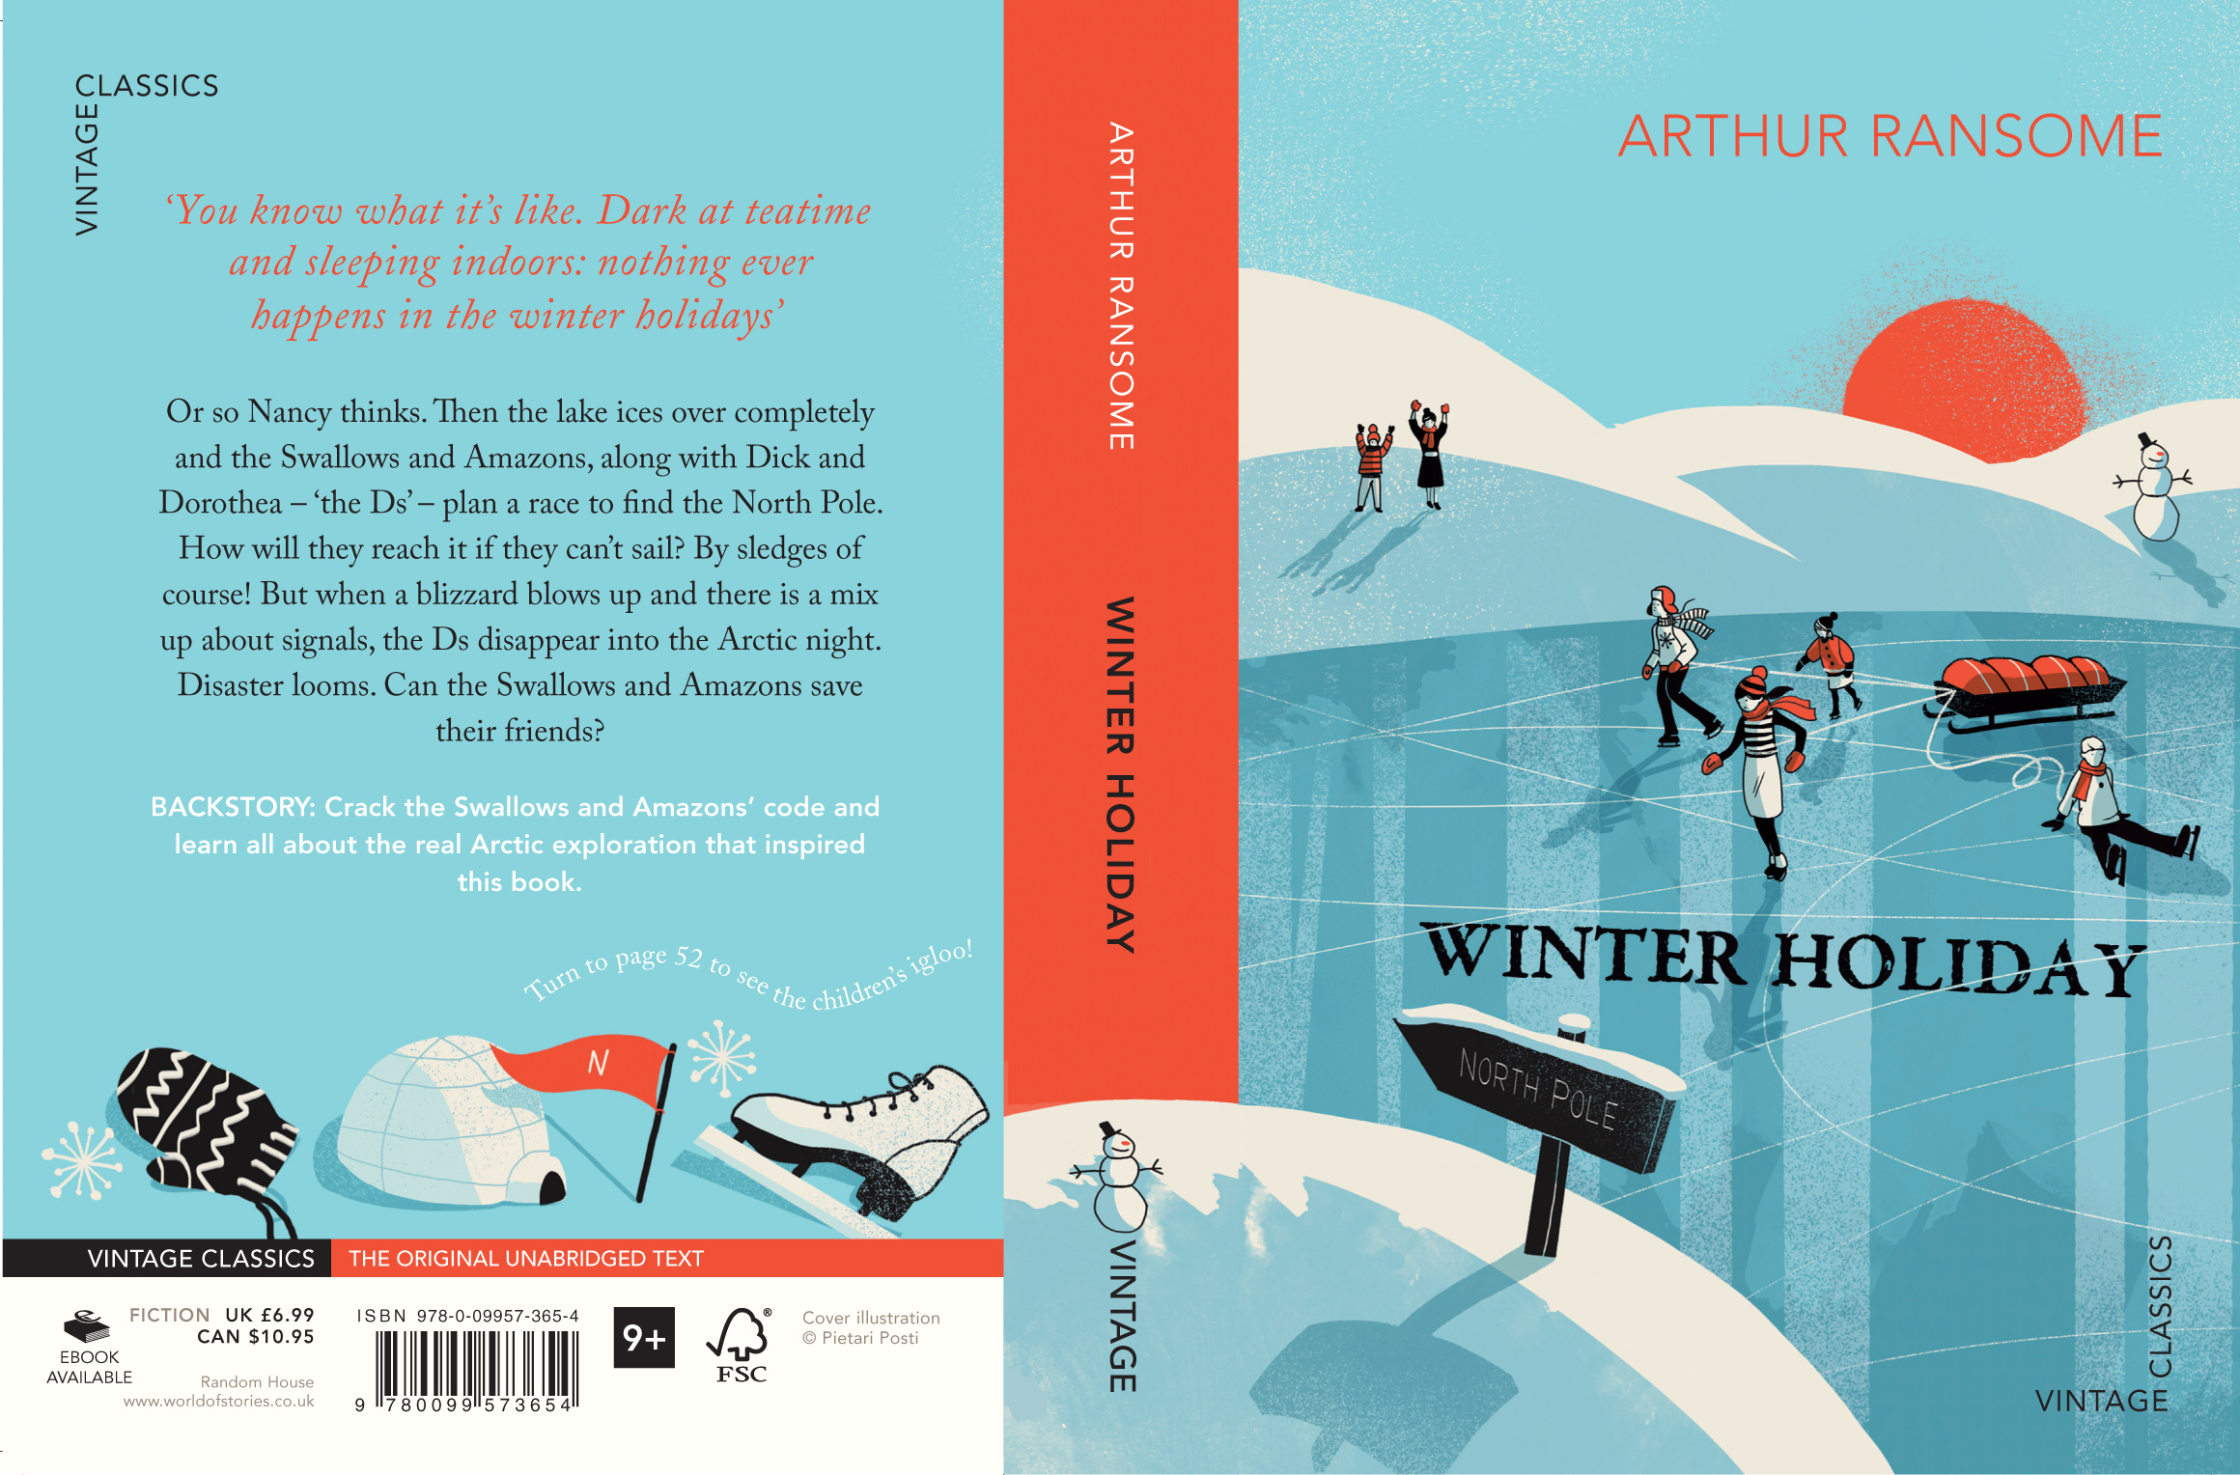 Arthur Ransome - Winter Holiday Cover